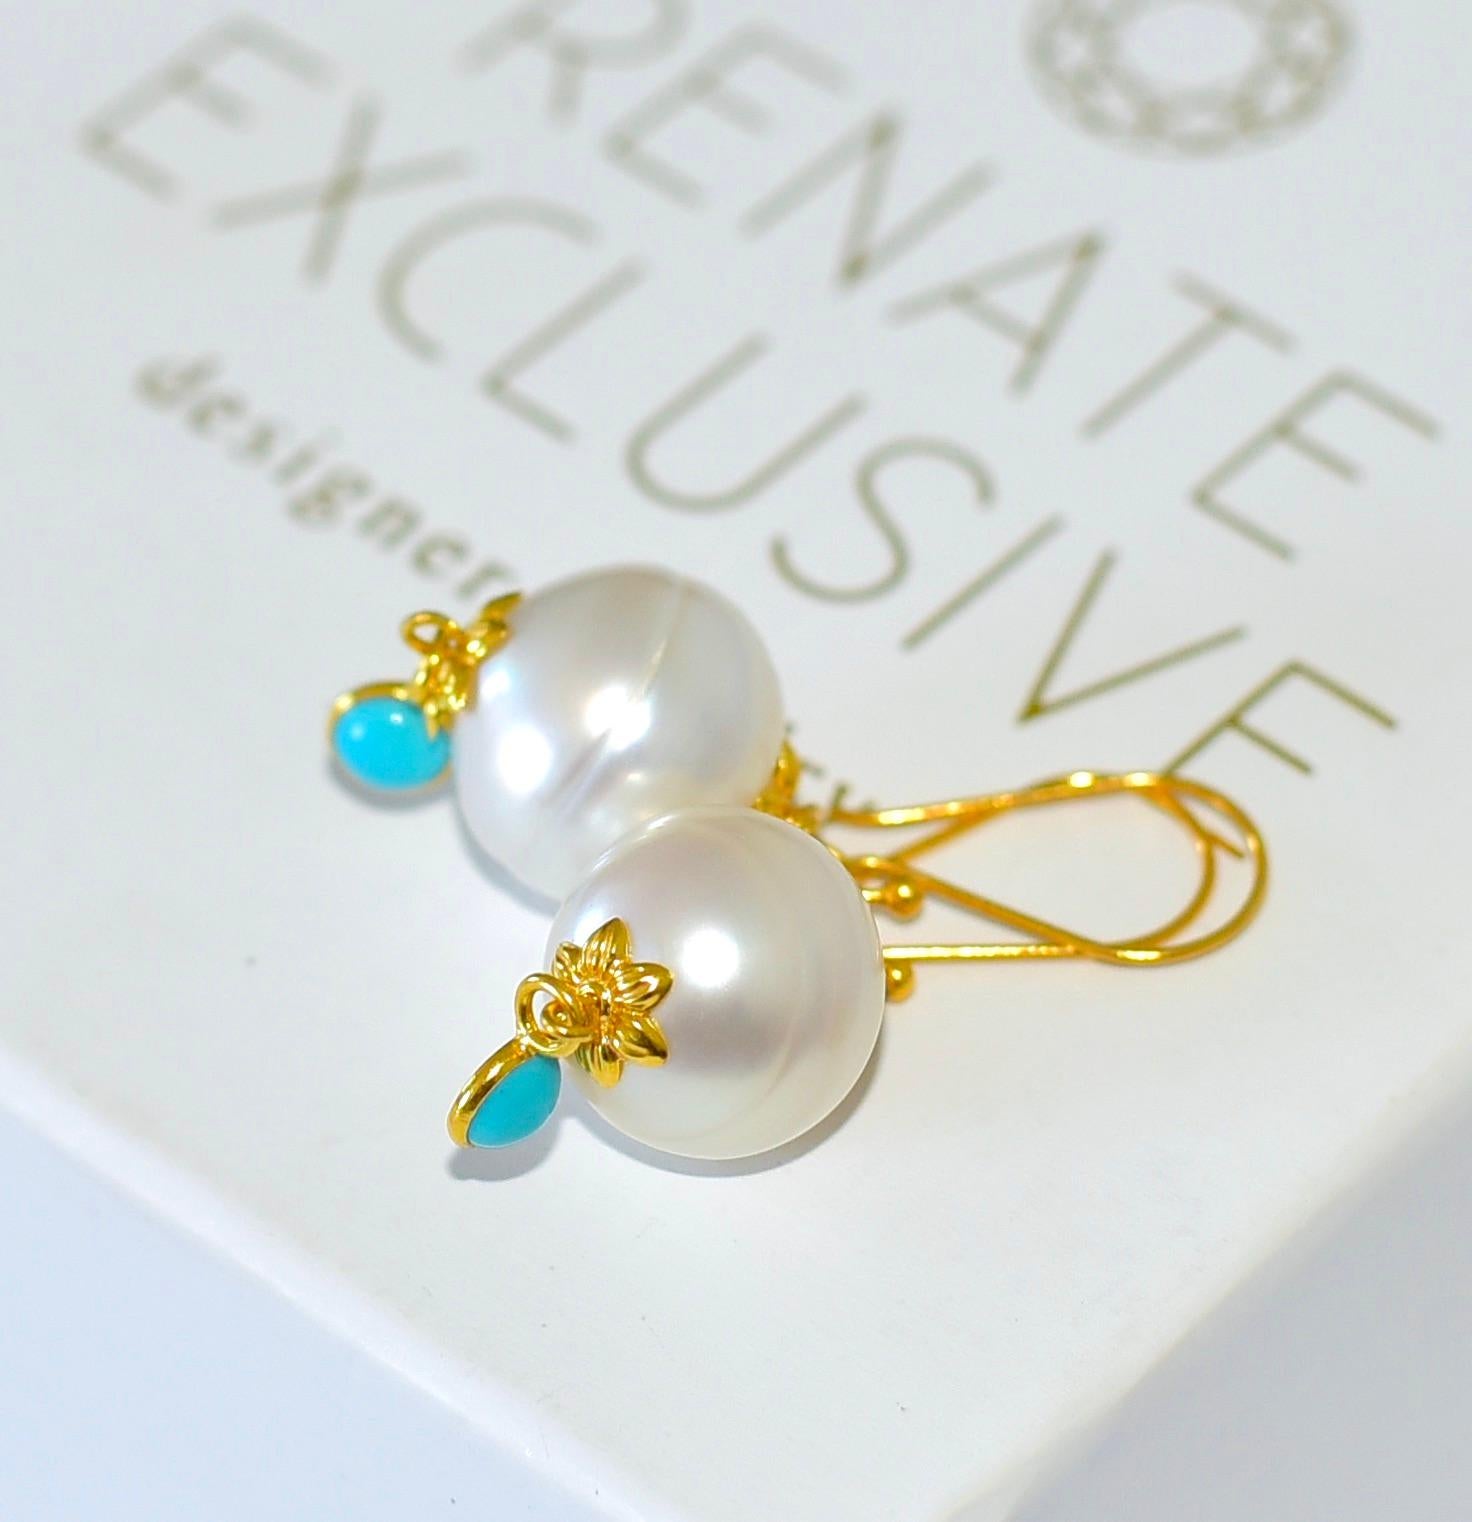 
Classic, dangling pearl earrings with a petite turquoise pendant on the end. In summer, mobile, and elegant. Total length 2 inches.
South Sea Pearl size: 13mm 
18K Solid Yellow Gold, 9mmx18mm 
18K Solid Yellow Gold leaf bead
